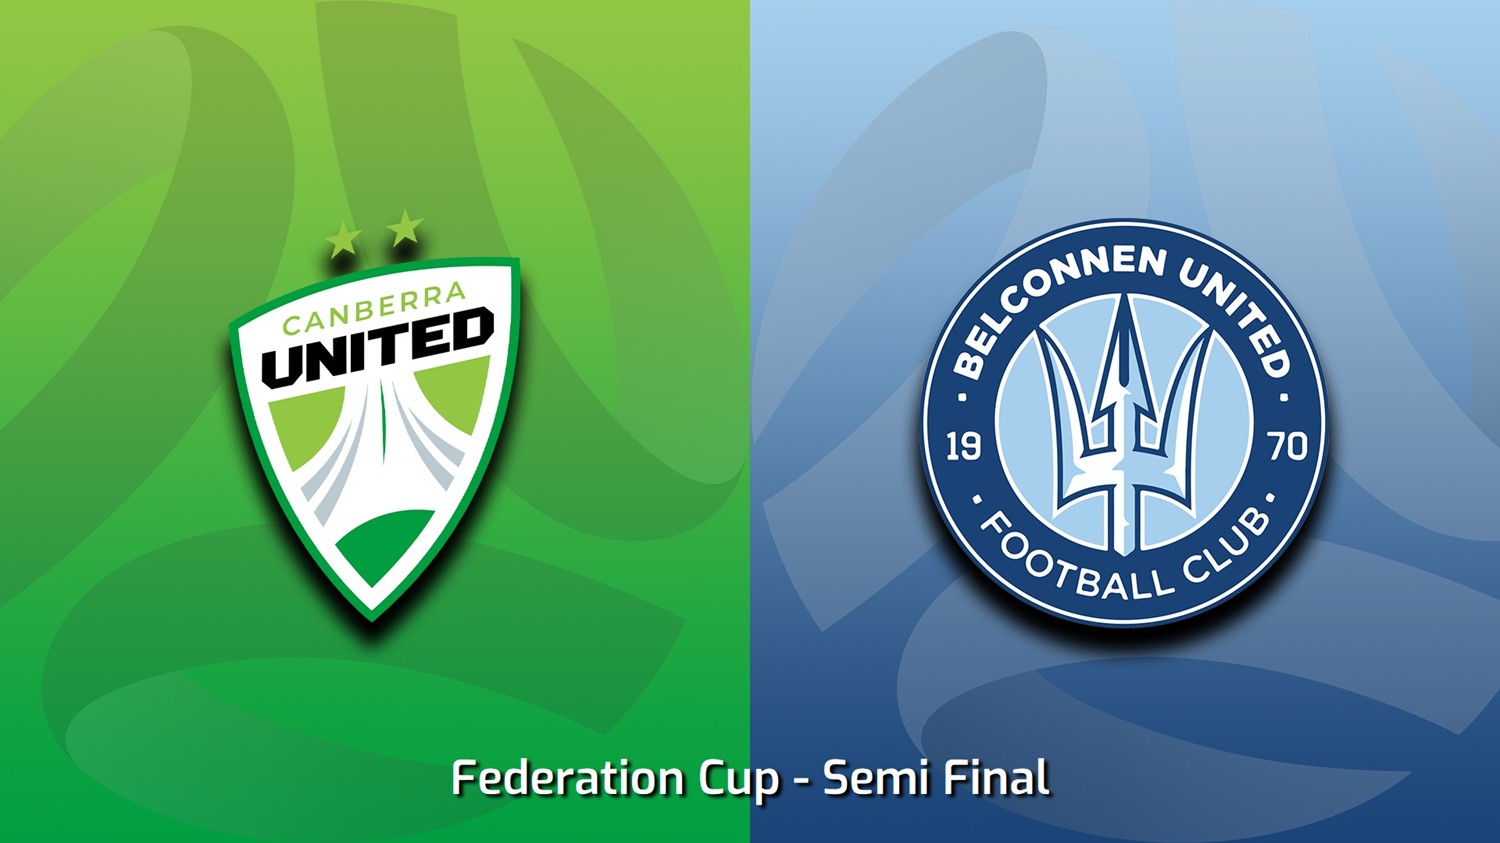 230503-Federation Cup Semi Final - Canberra United Academy v Belconnen United (women) Minigame Slate Image